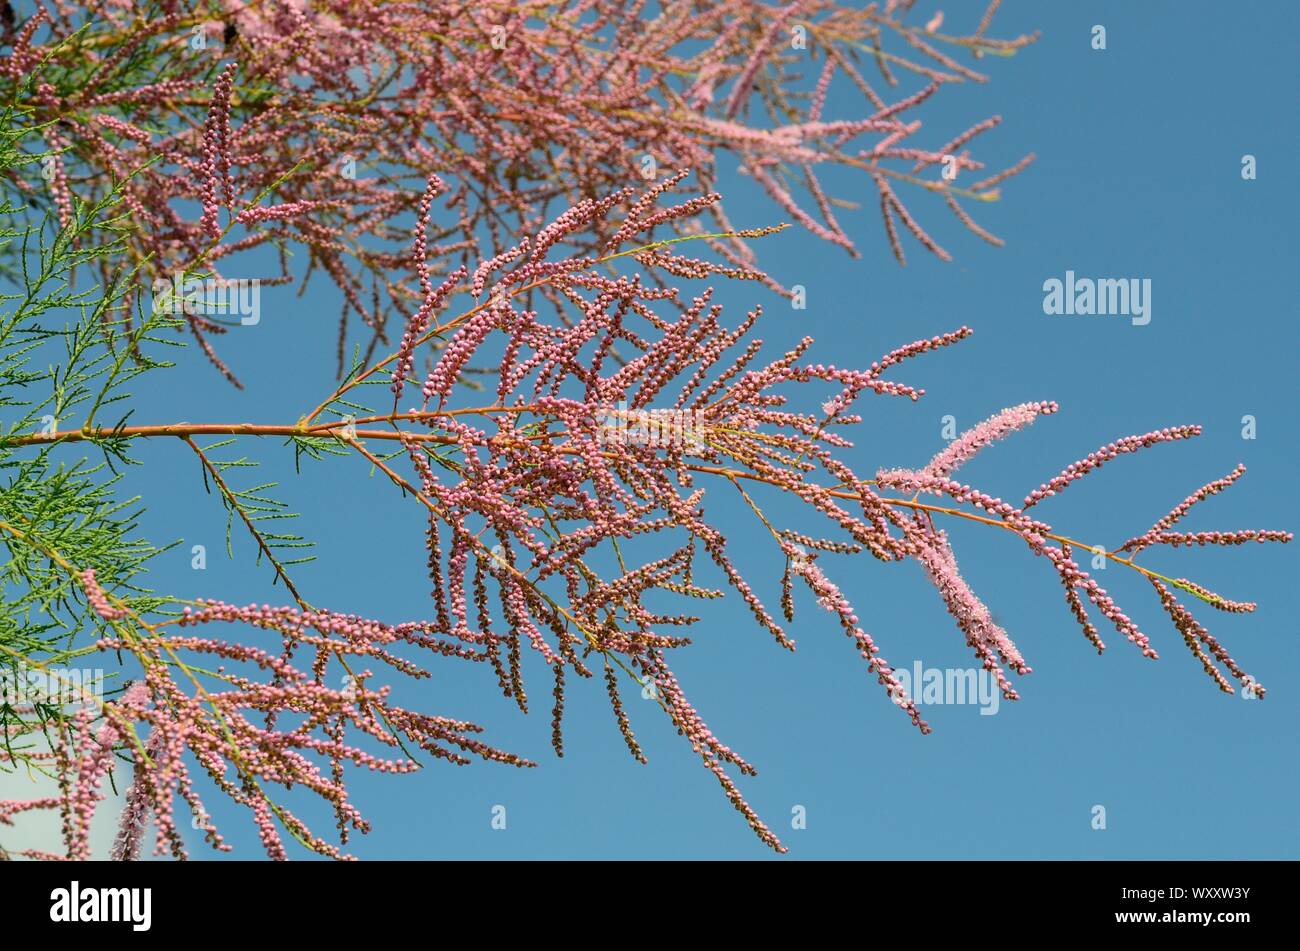 Tamarix ramosissima Pink Cascade feathery plumes of tiny pink flowers on arching branches Stock Photo